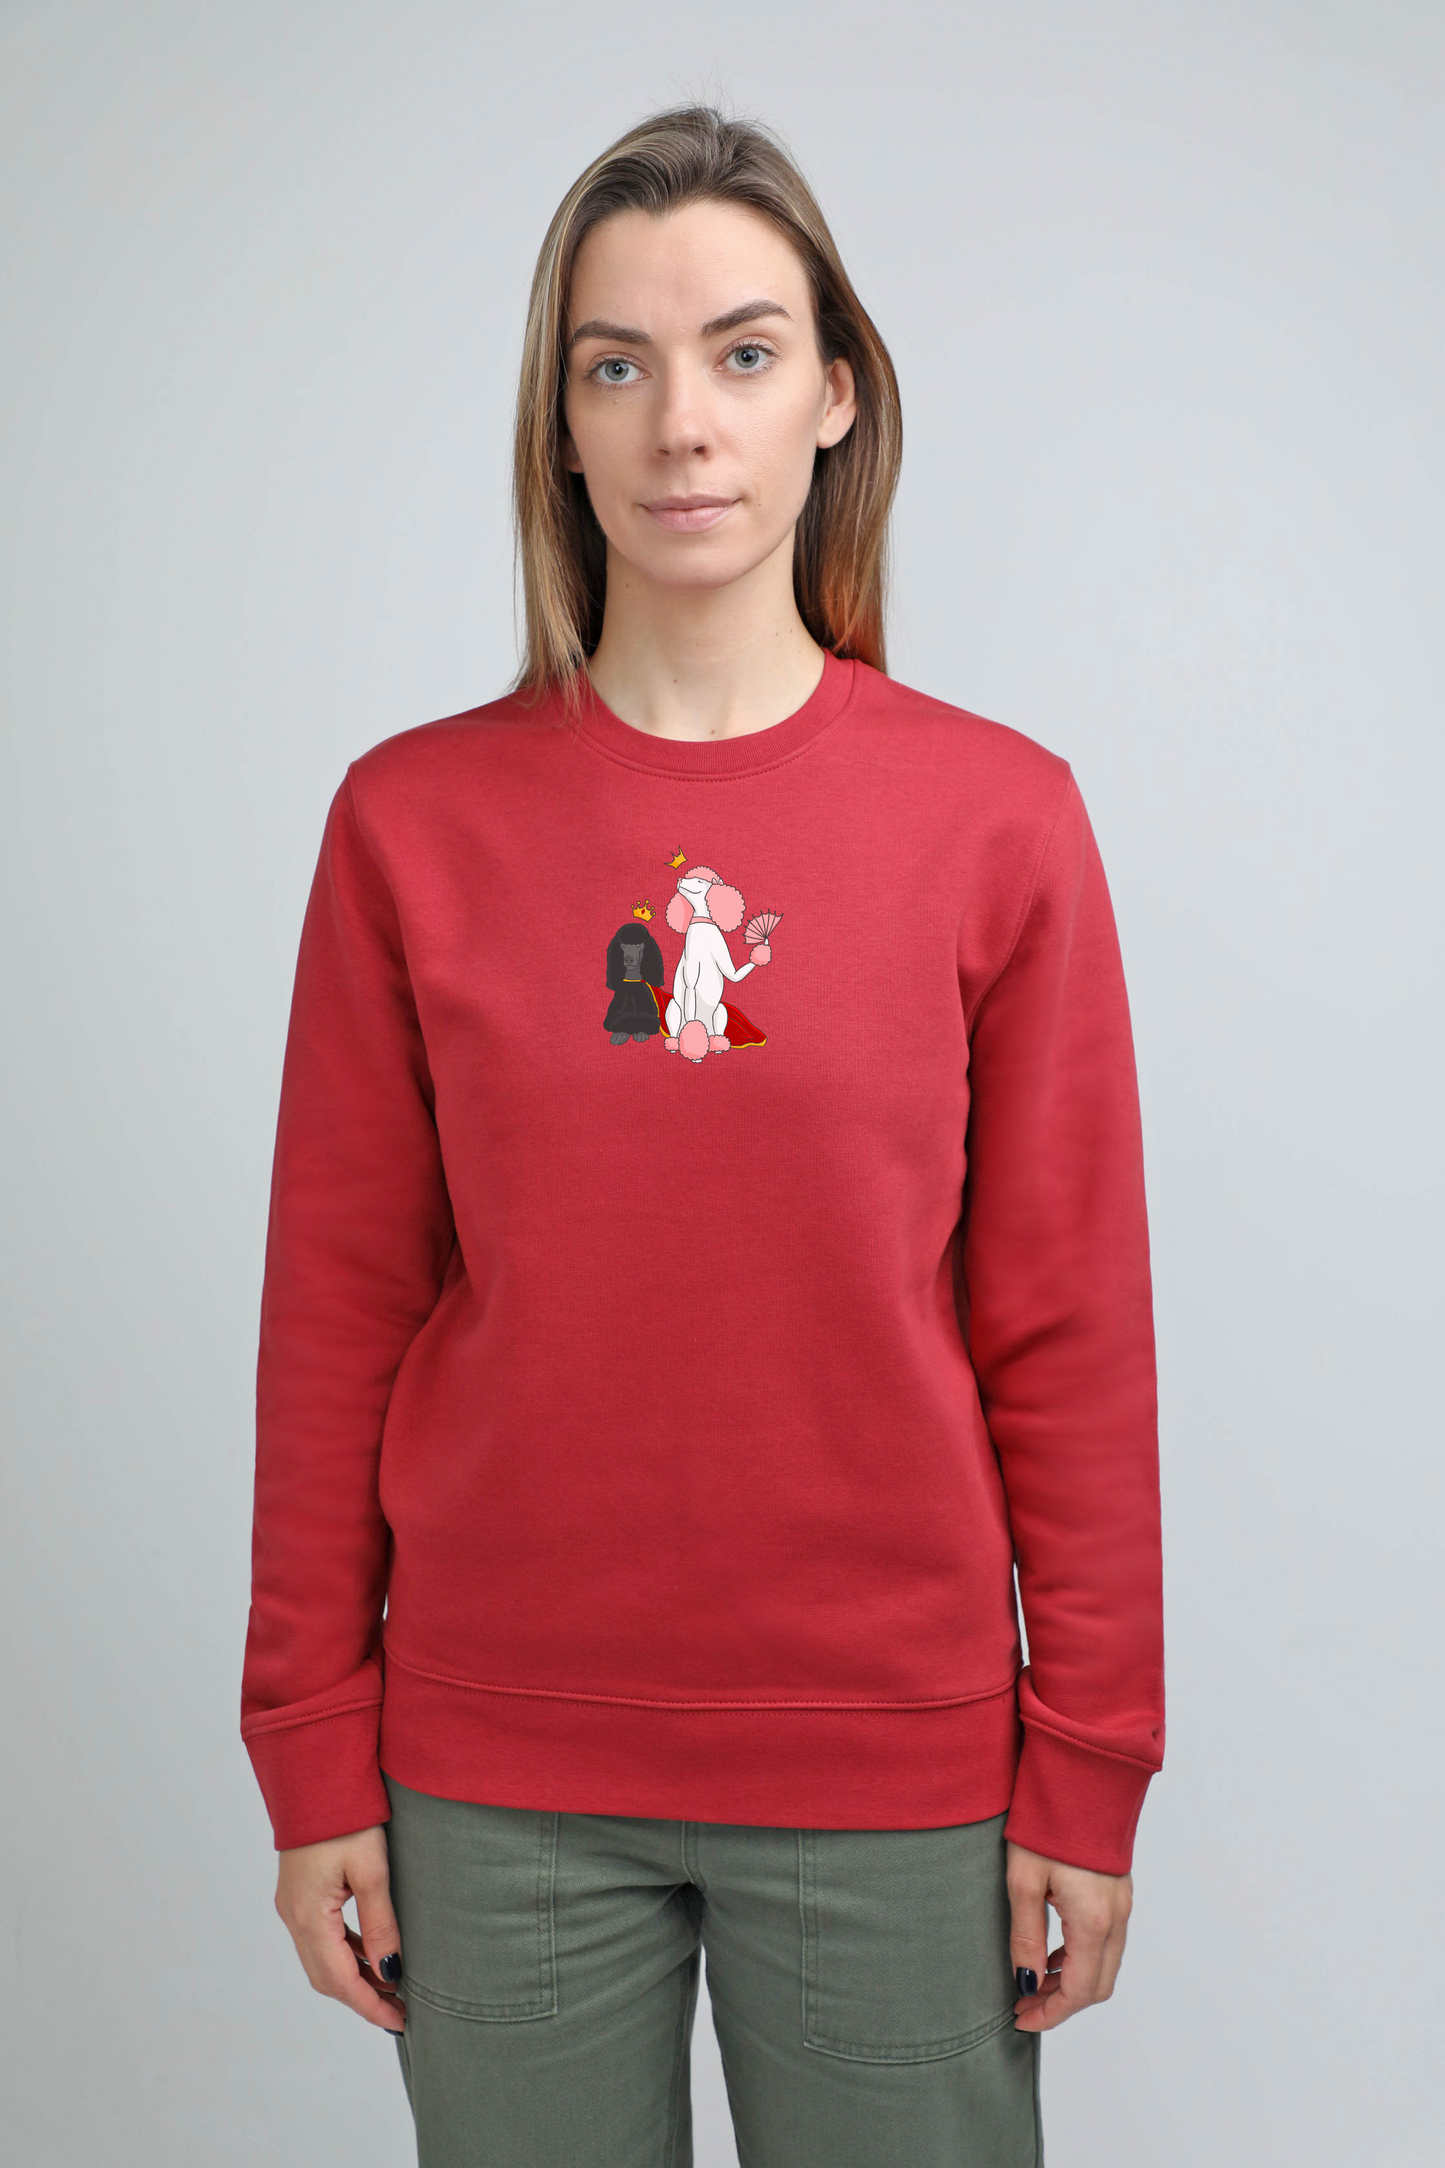 Royal dogs | Crew neck sweatshirt with dogs. Regular fit | Unisex by My Wild Other